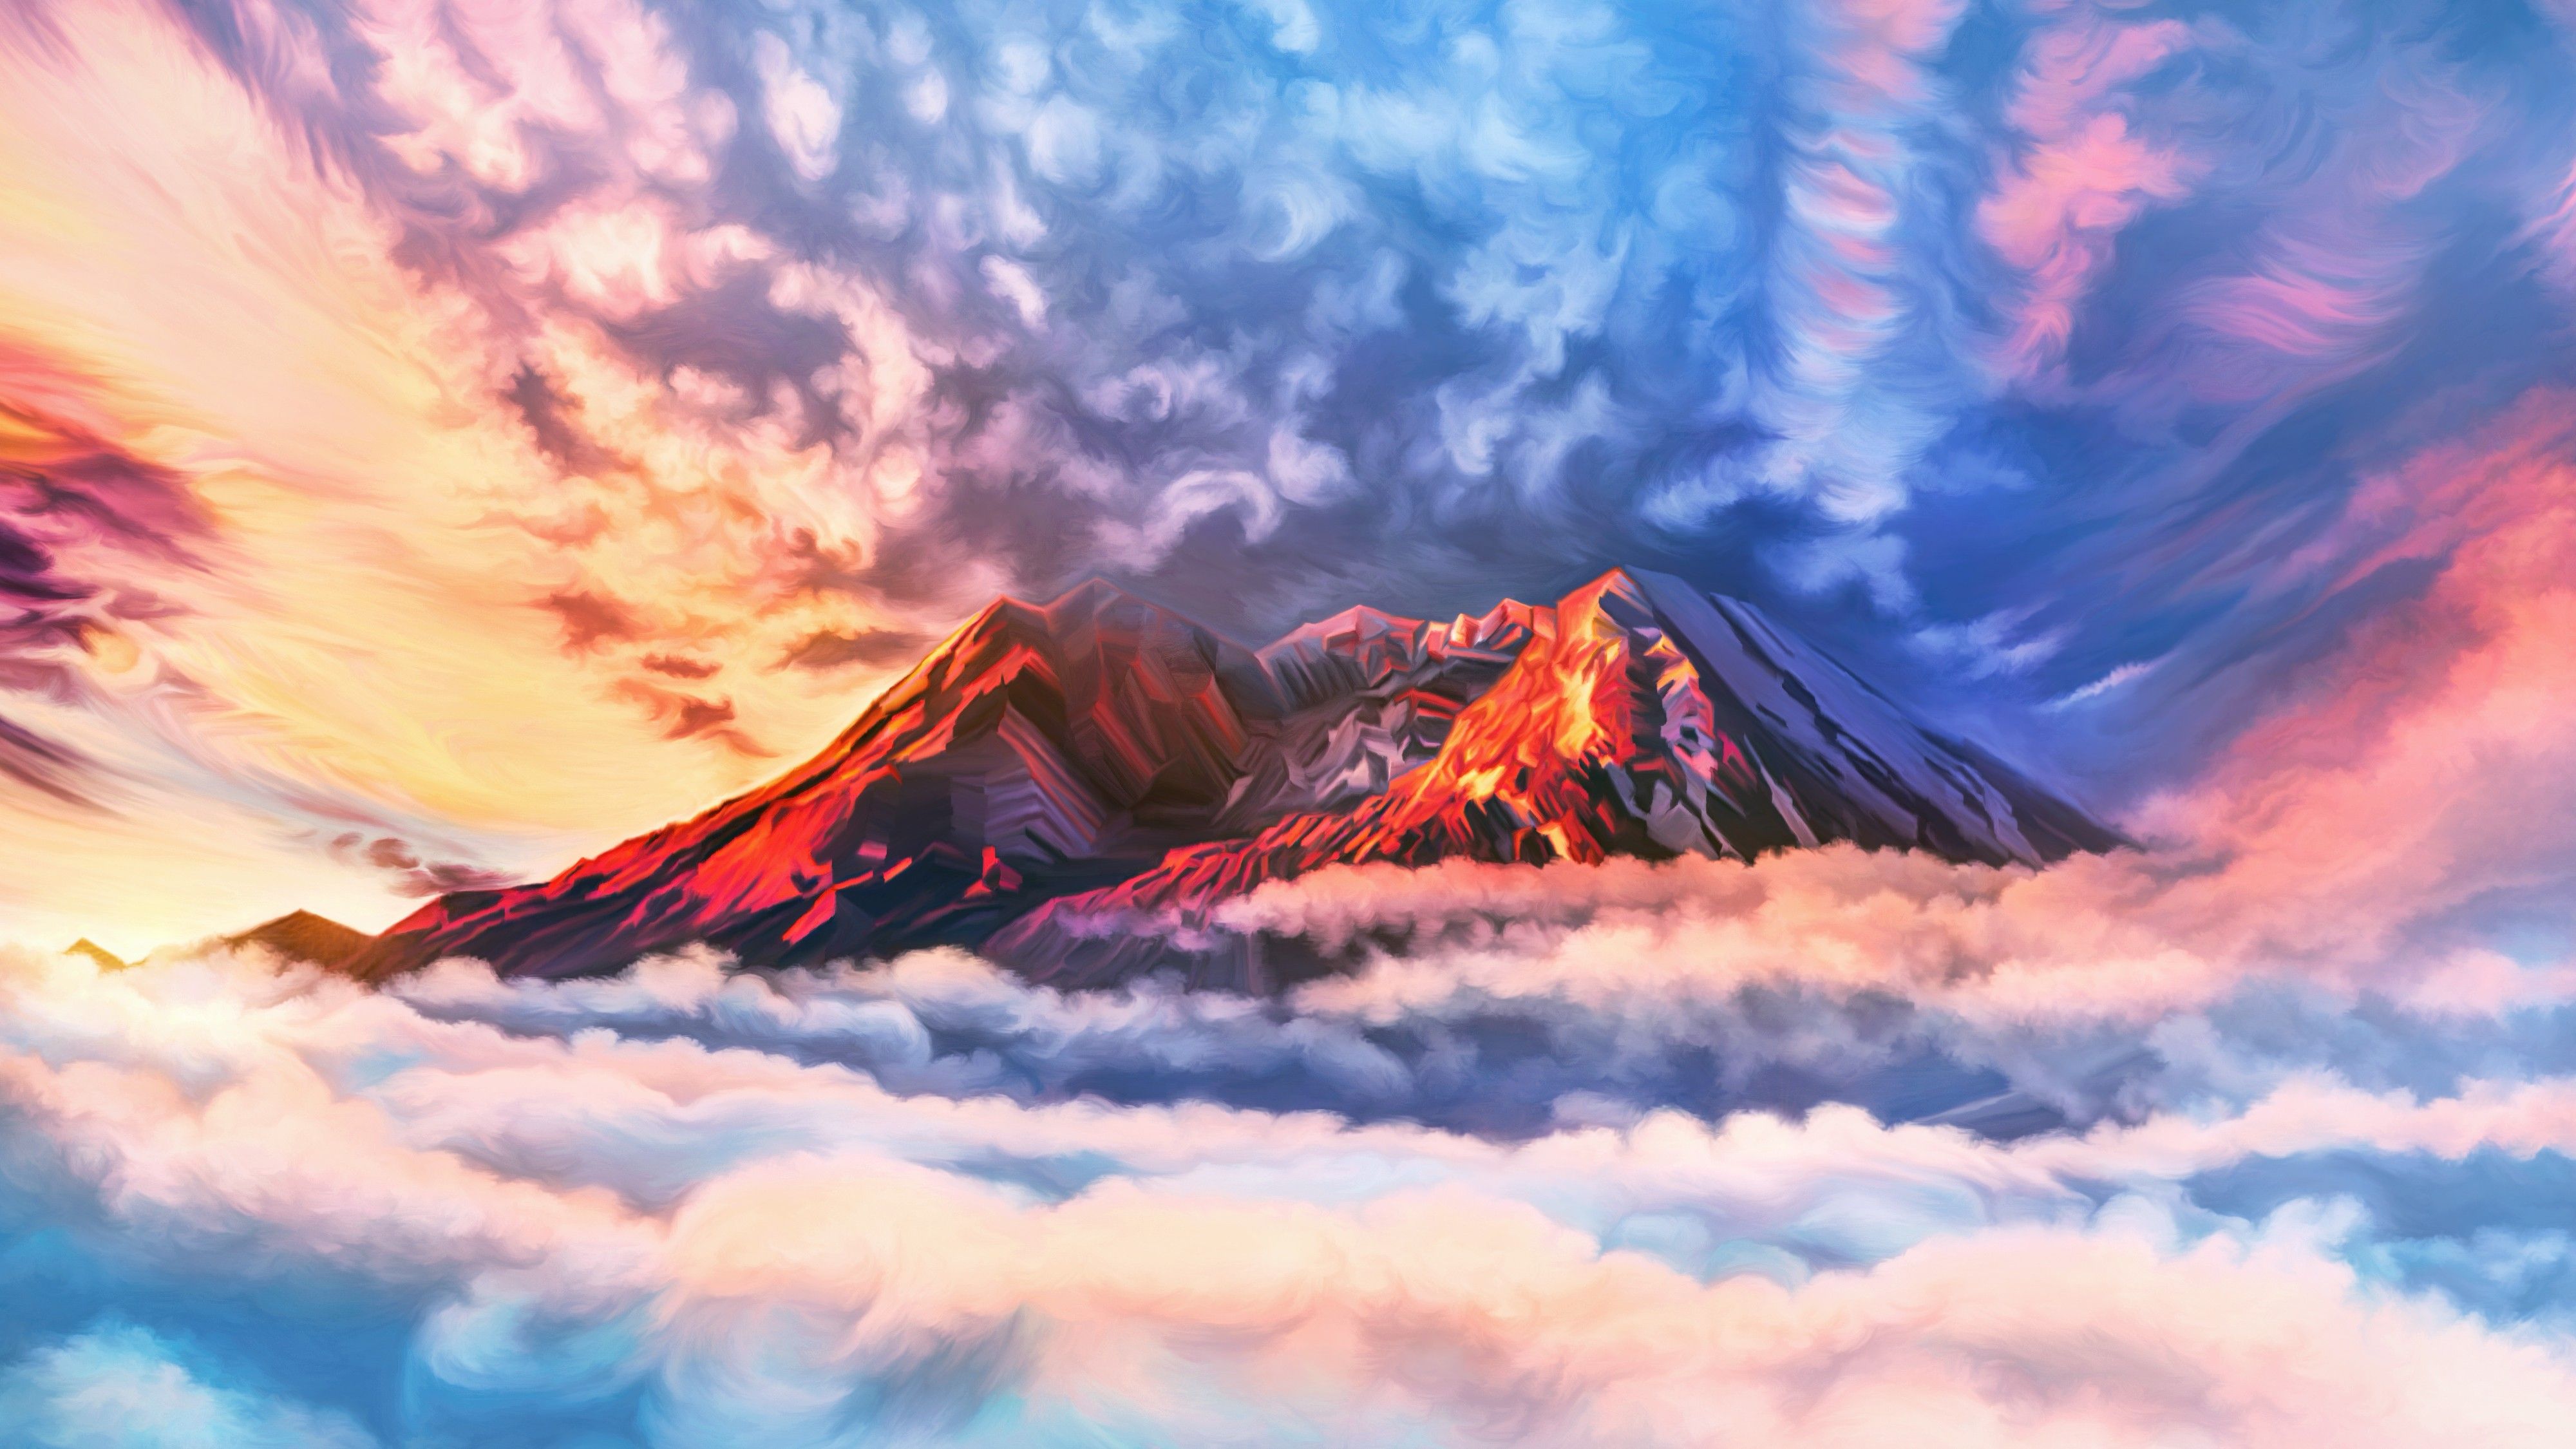 Mountain Inside Clouds Wallpapers